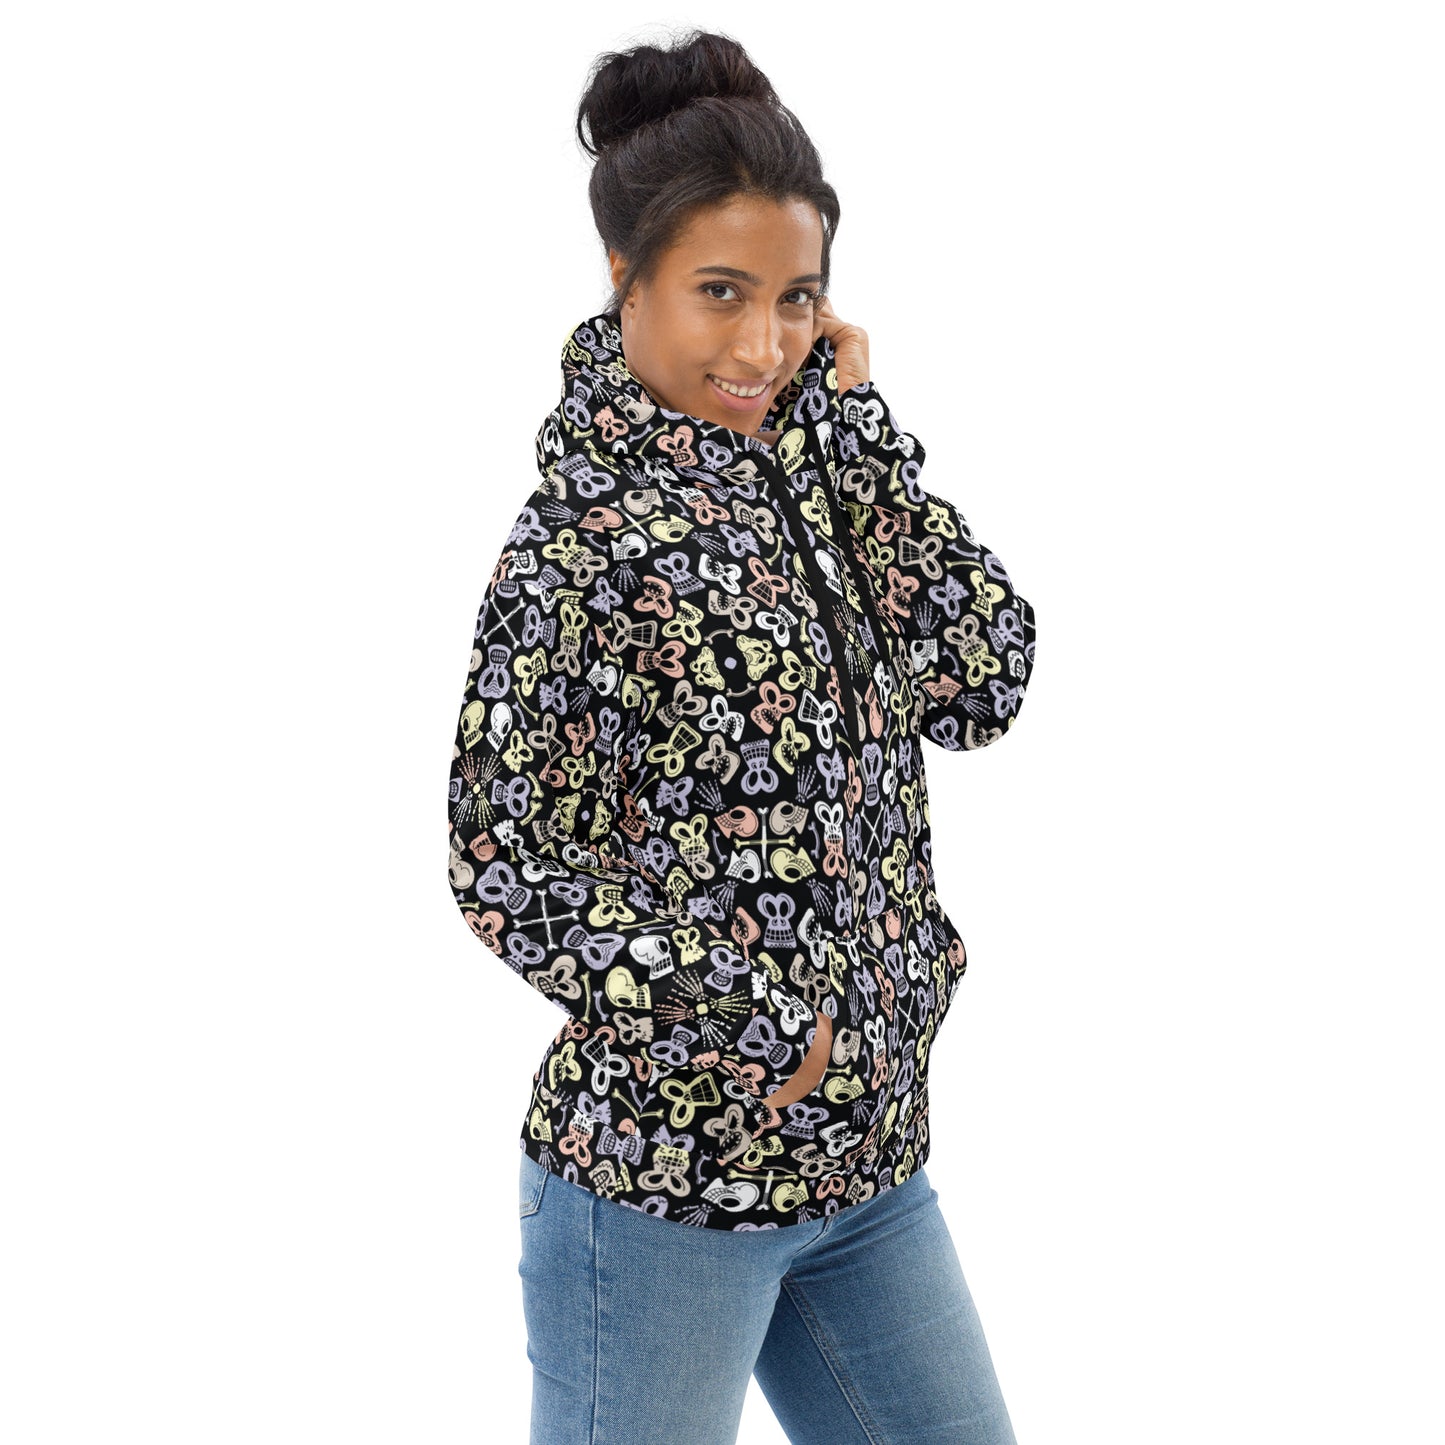 Bewitched Skulls: Hauntingly Chic Pattern Design - Unisex Hoodie. Lifestyle